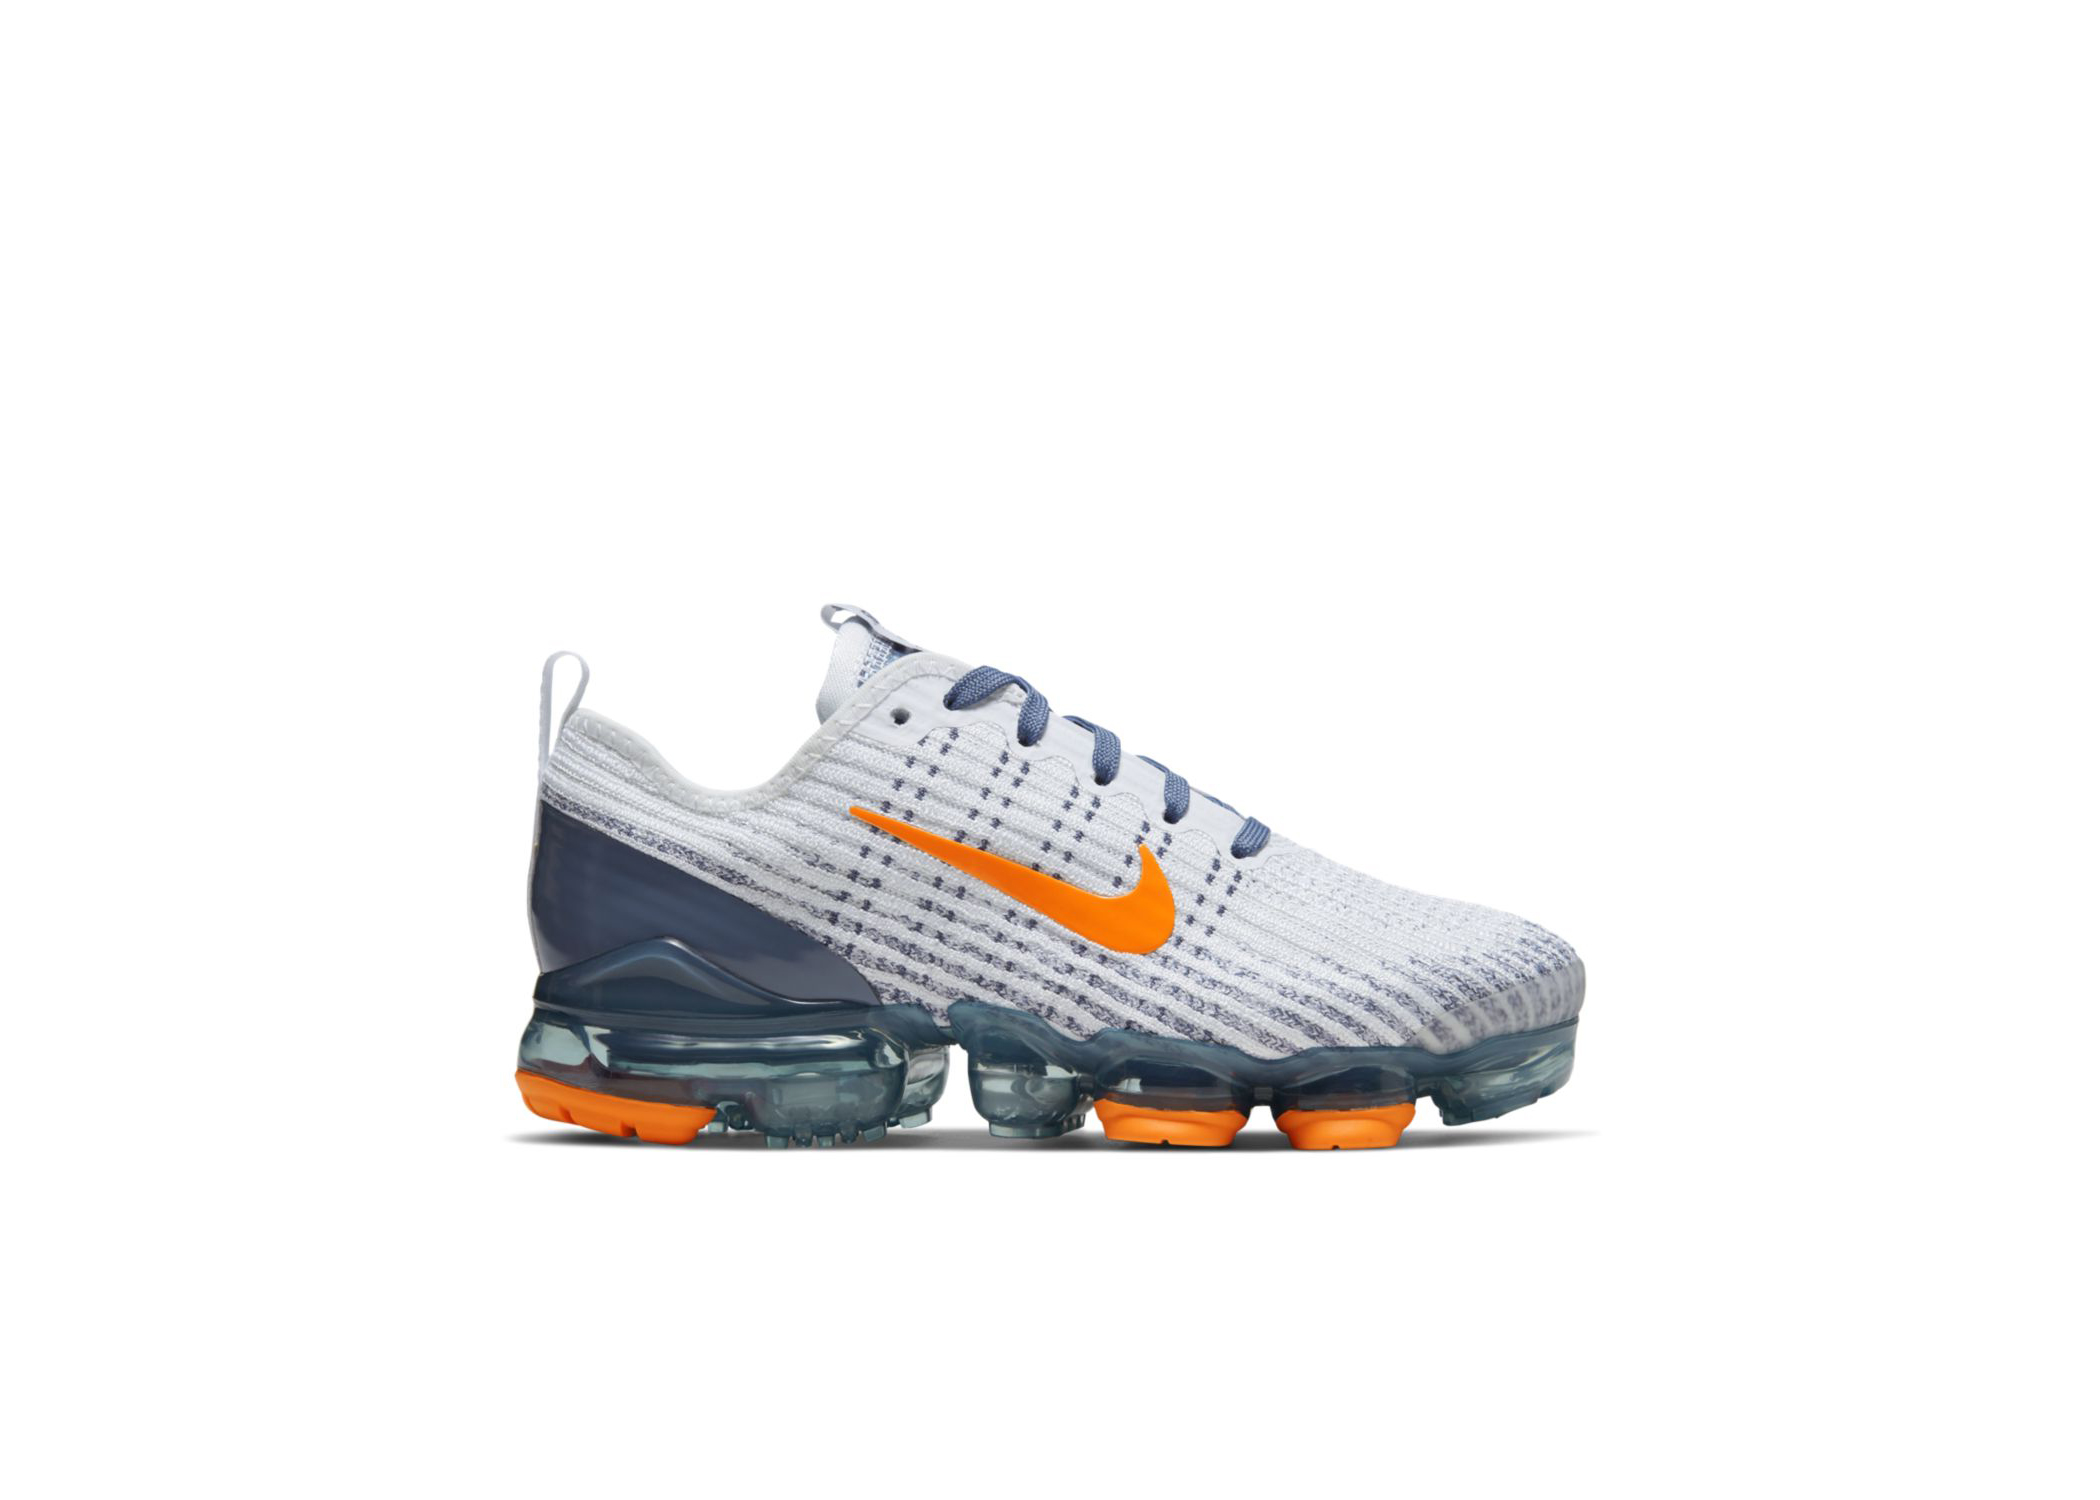 vapormax flyknit 3 blue and white